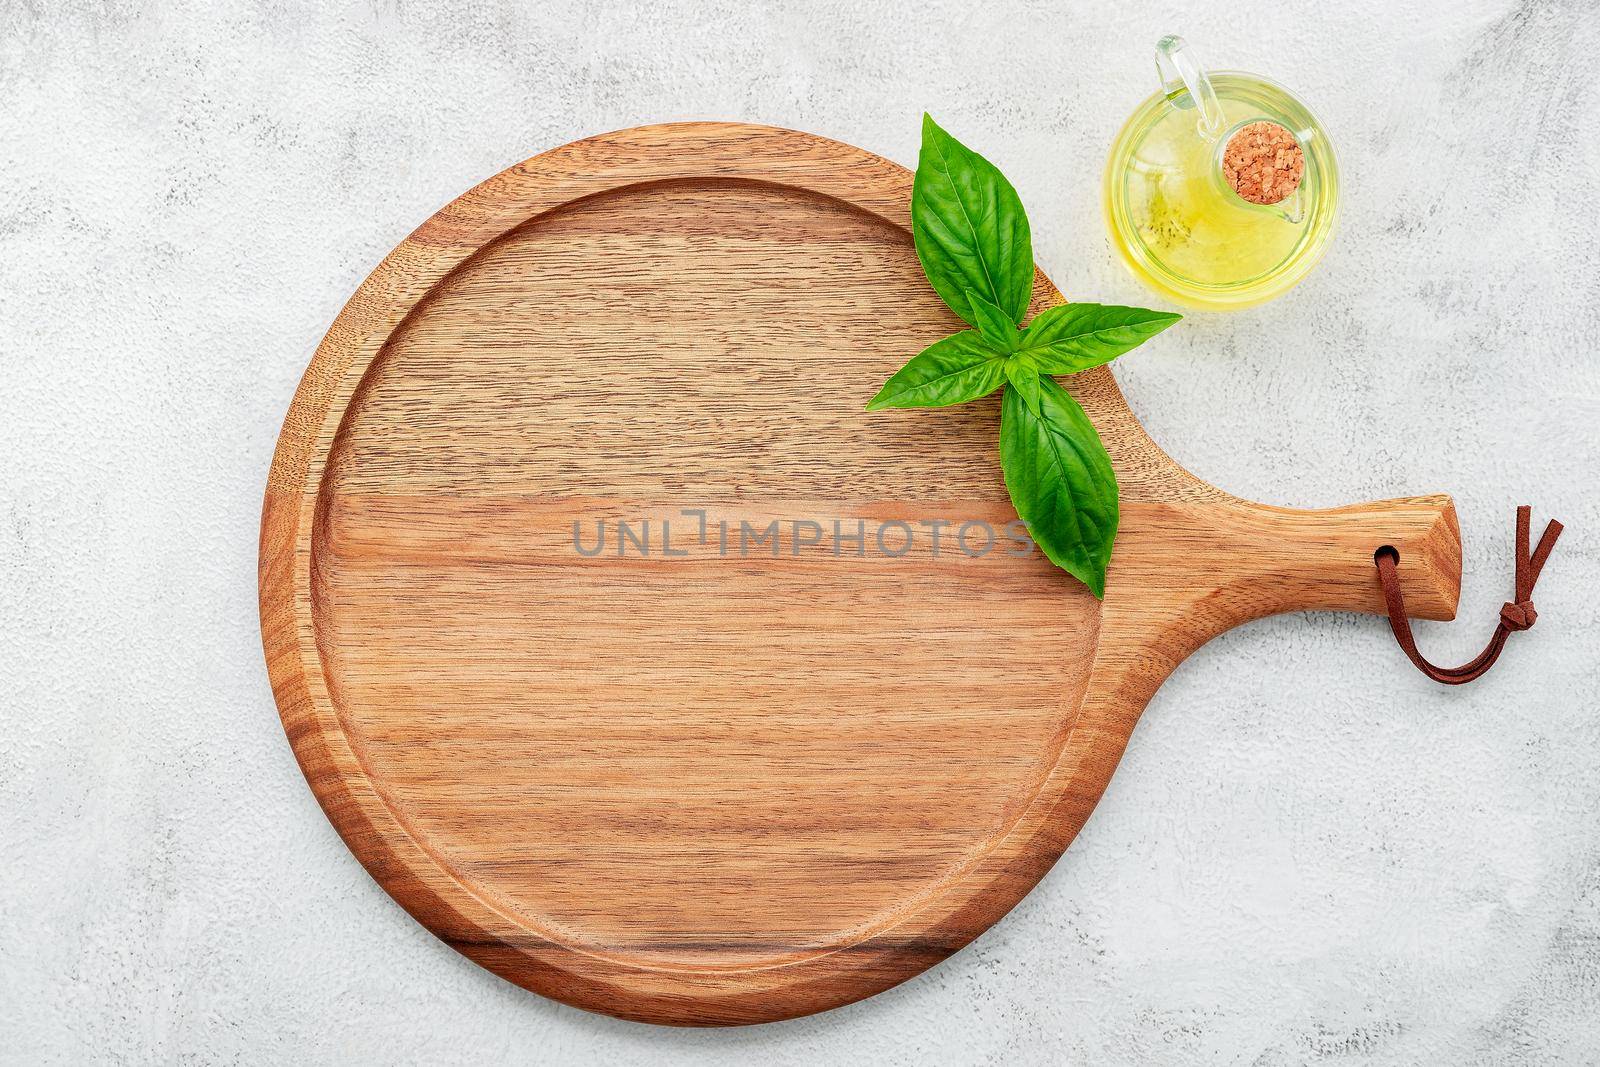 Empty wooden pizza platter set up on white concrete. Pizza tray on white concrete background flat lay and copy space.